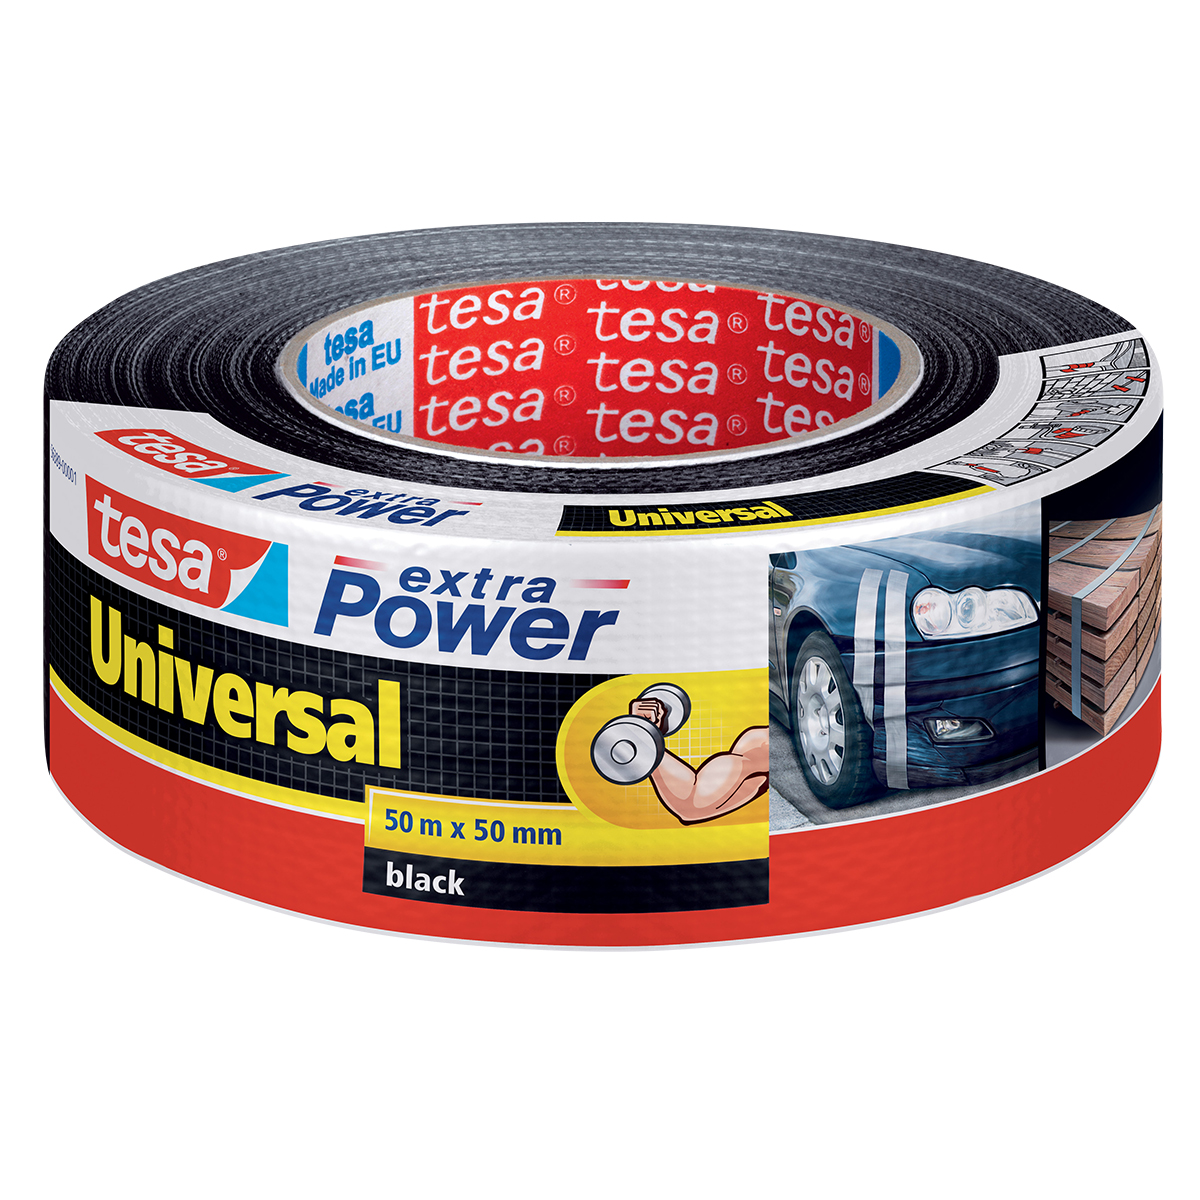 tesa duct tape extra Power Universal 50m x 50mm fabric reinforced adhesive tape